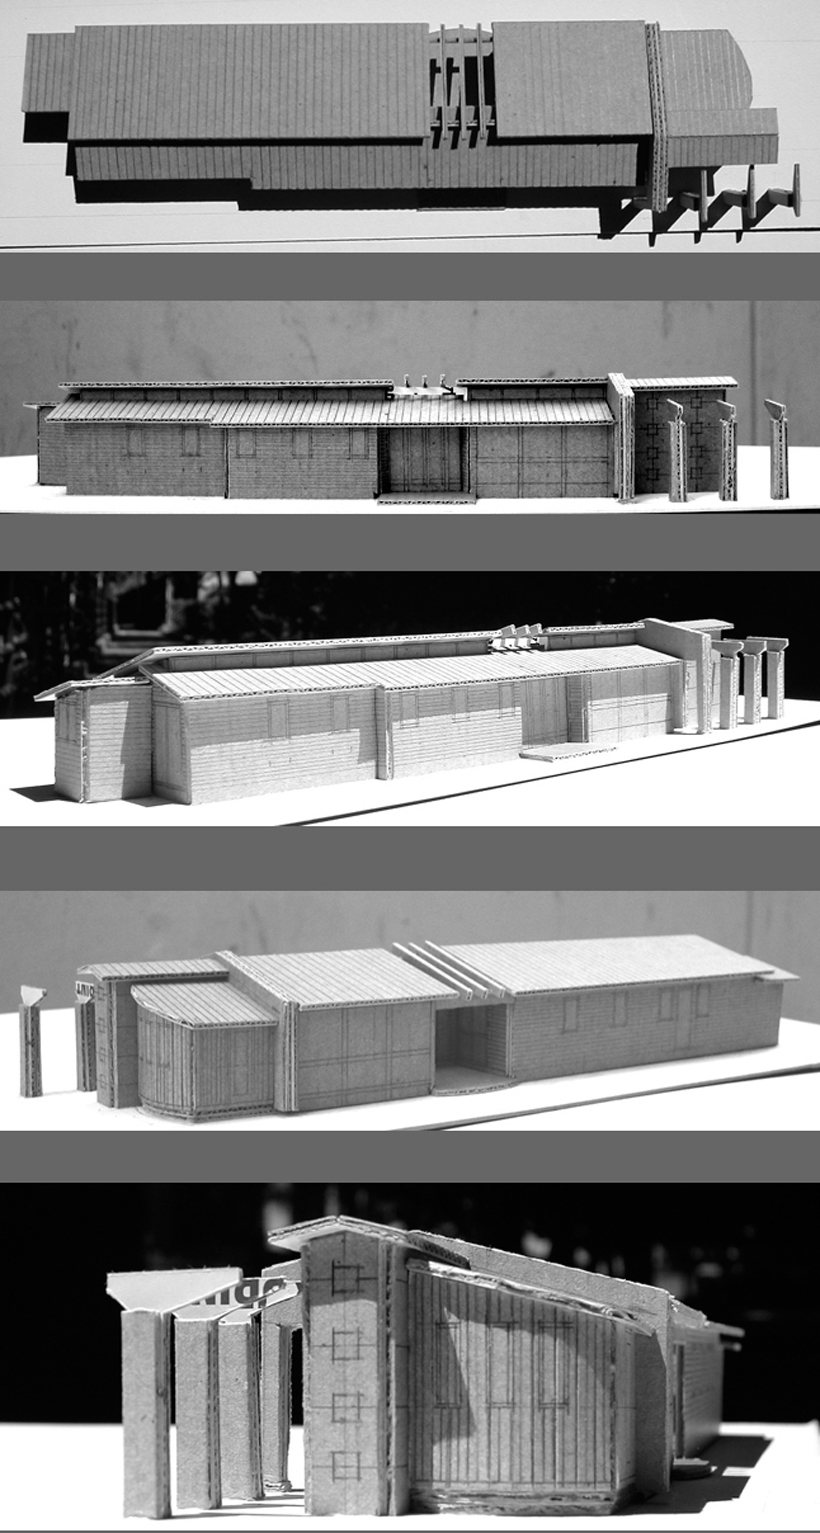 Faculty House, ENR architects with Topos Architects - Study Model